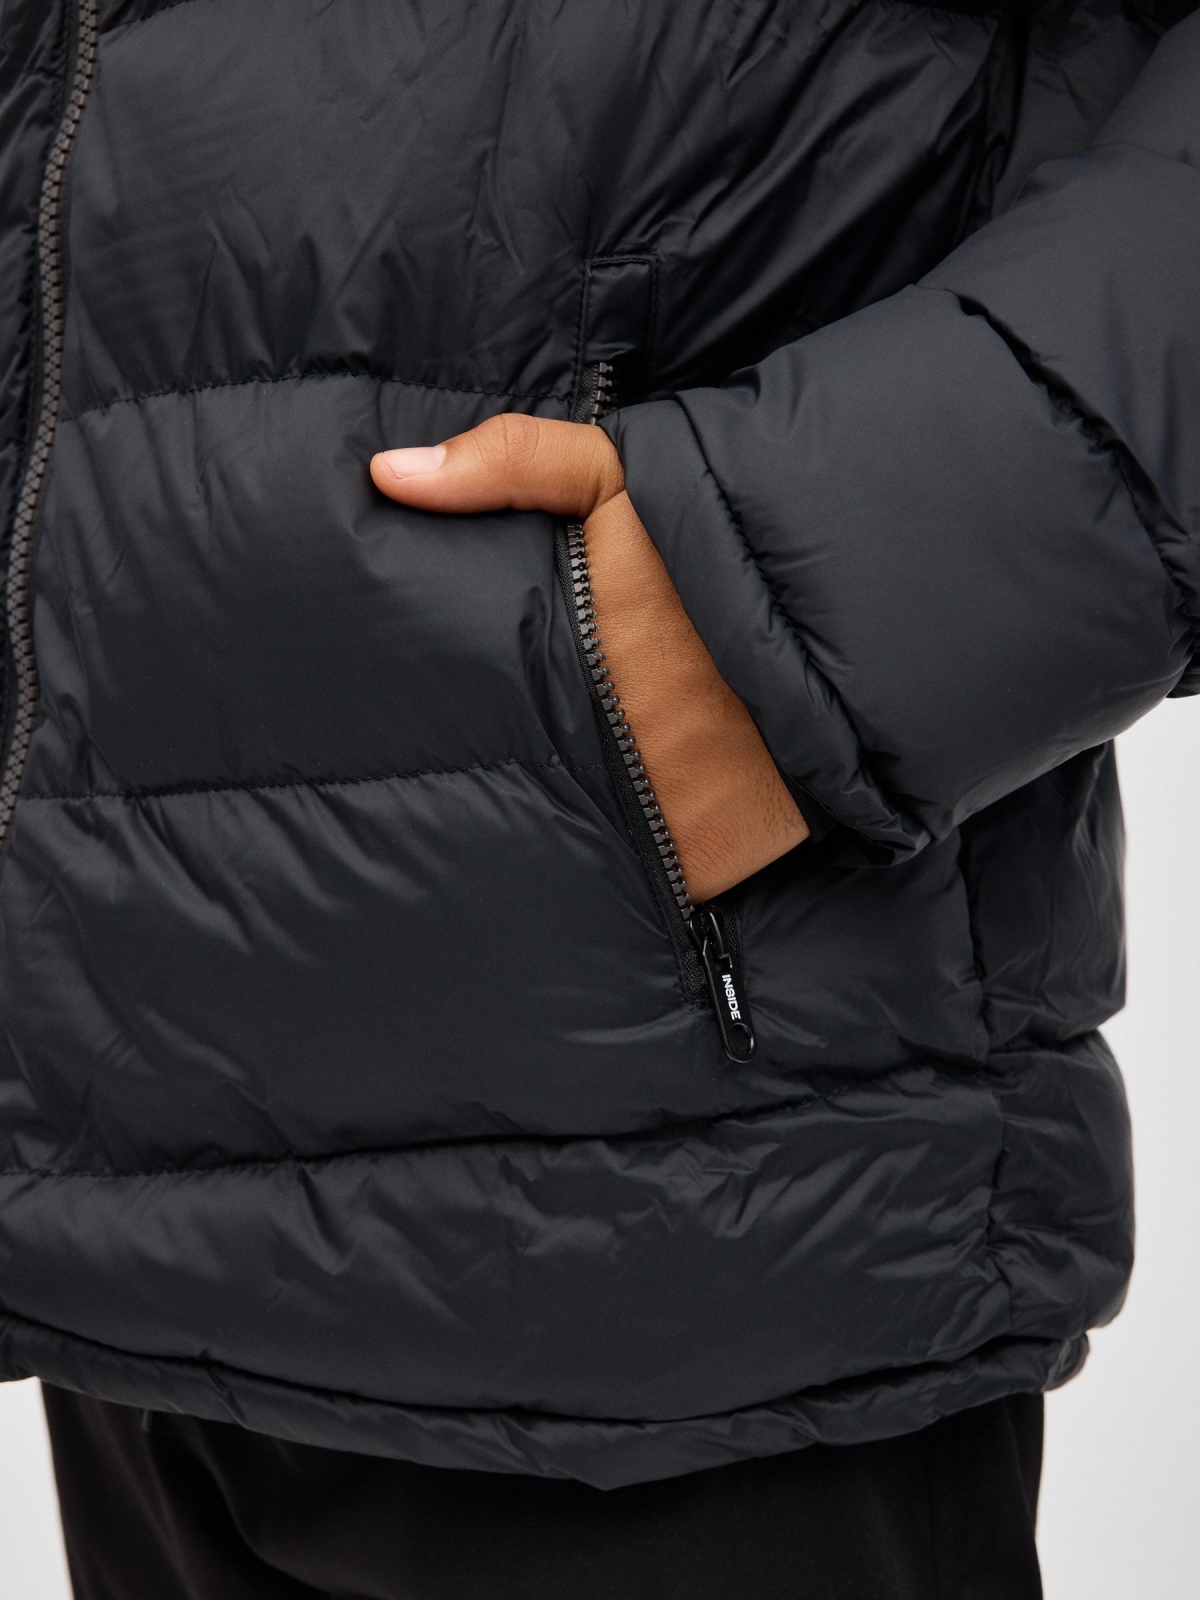 Nylon quilted coat black detail view